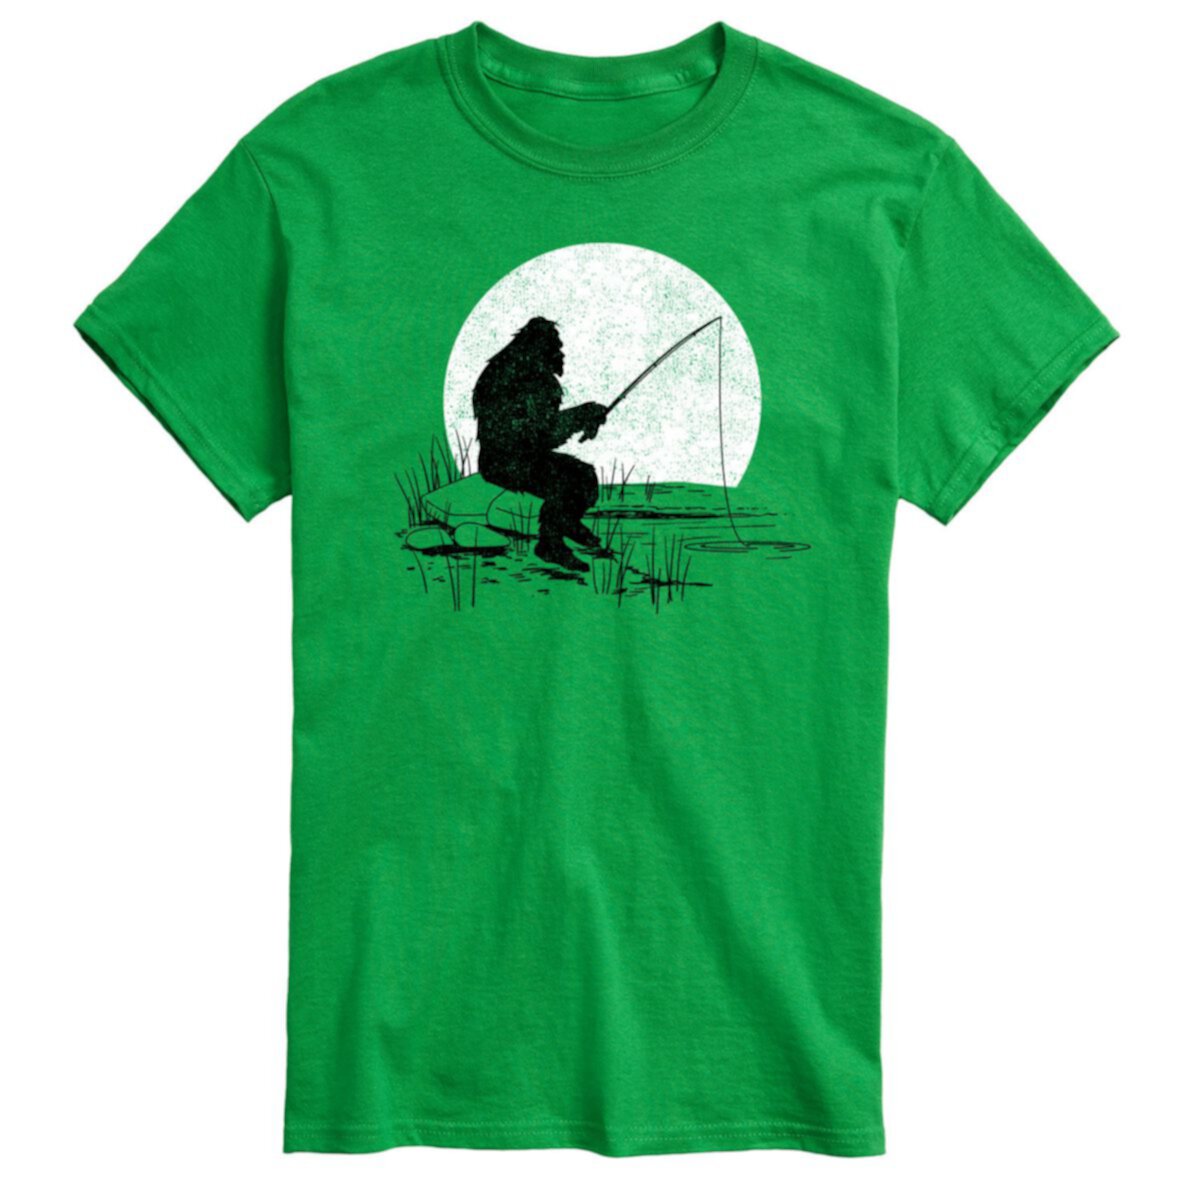 Big & Tall Sasquatch Fishing Graphic Tee Licensed Character